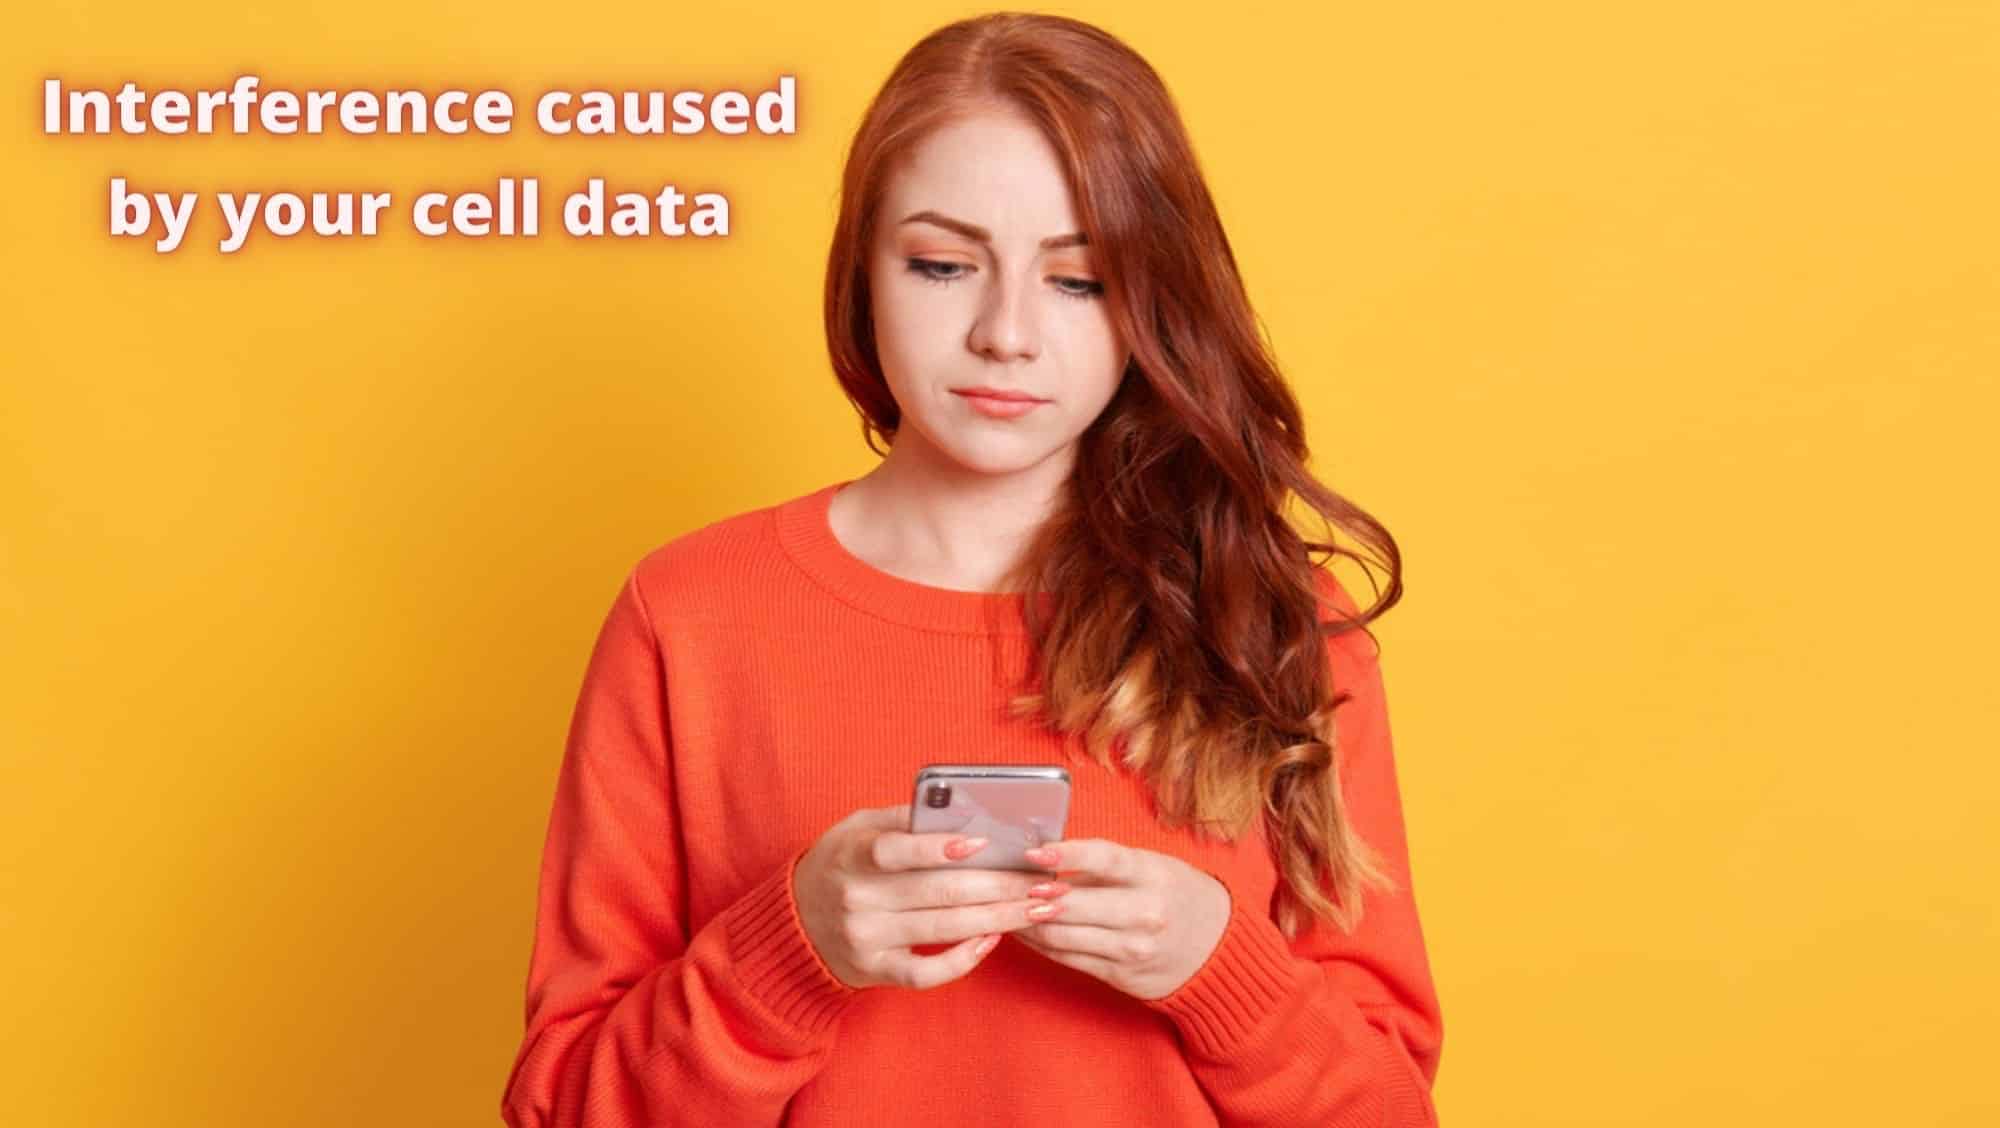 Interference caused by your cell data